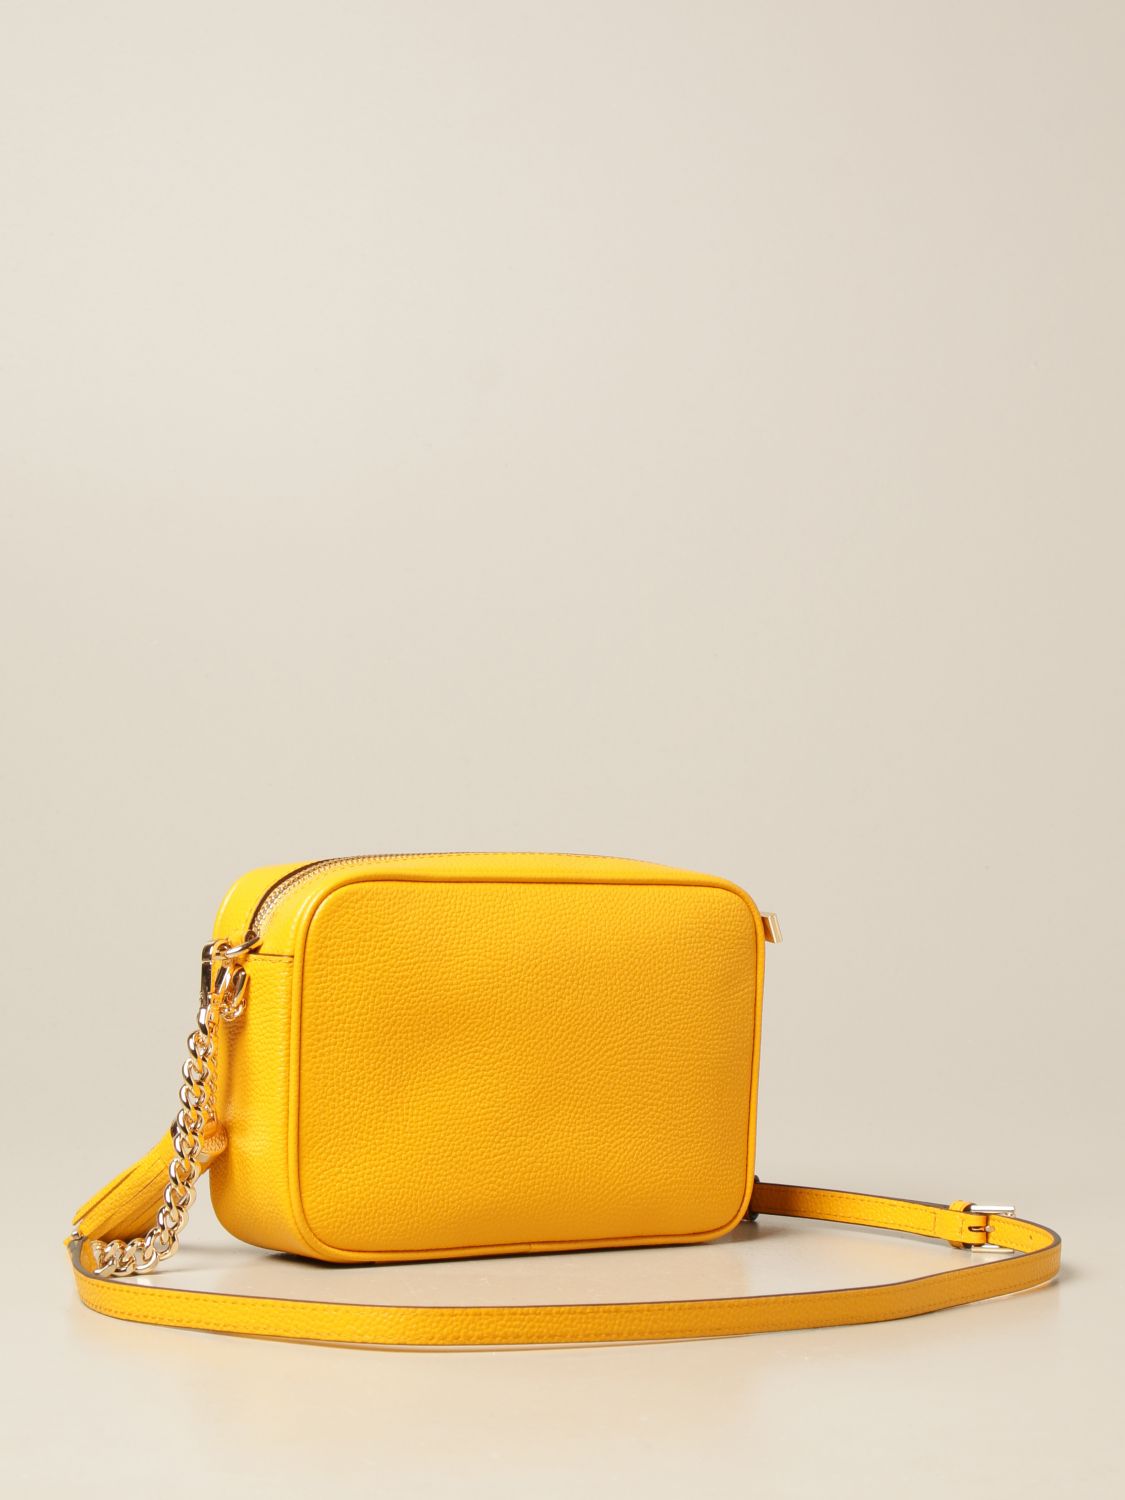 Leather crossbody bag Michael Kors Yellow in Leather - 27657729